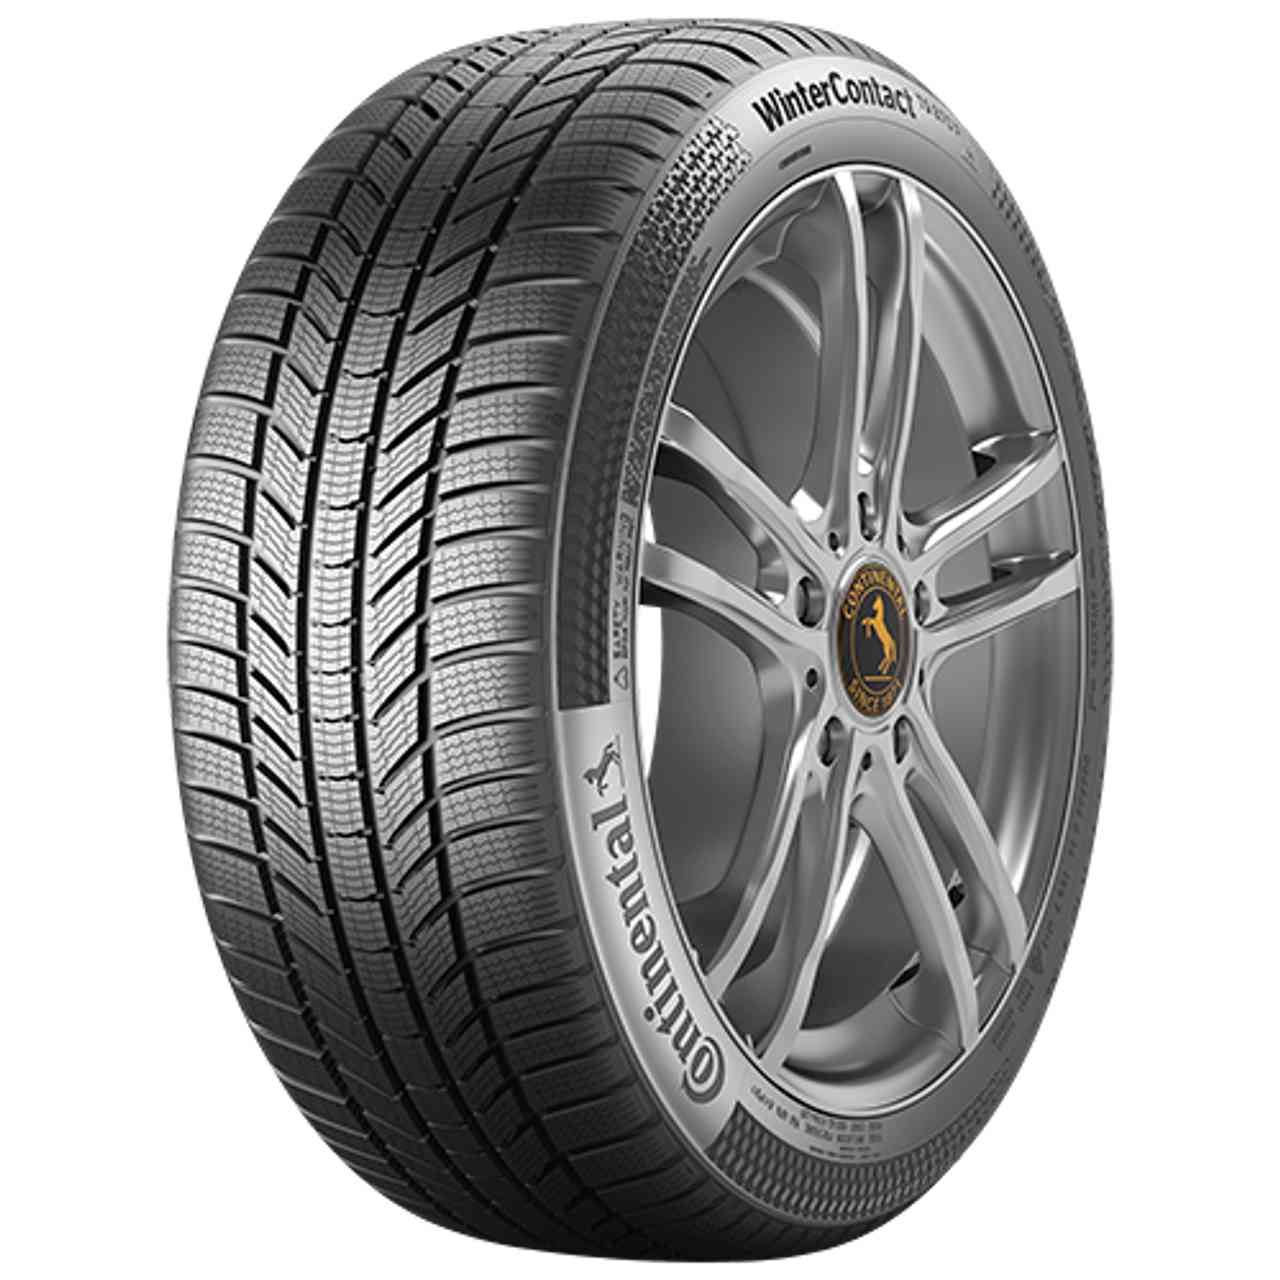 CONTINENTAL WINTERCONTACT TS 870 P (EVc) 245/45R21 104V FR BSW von Continental